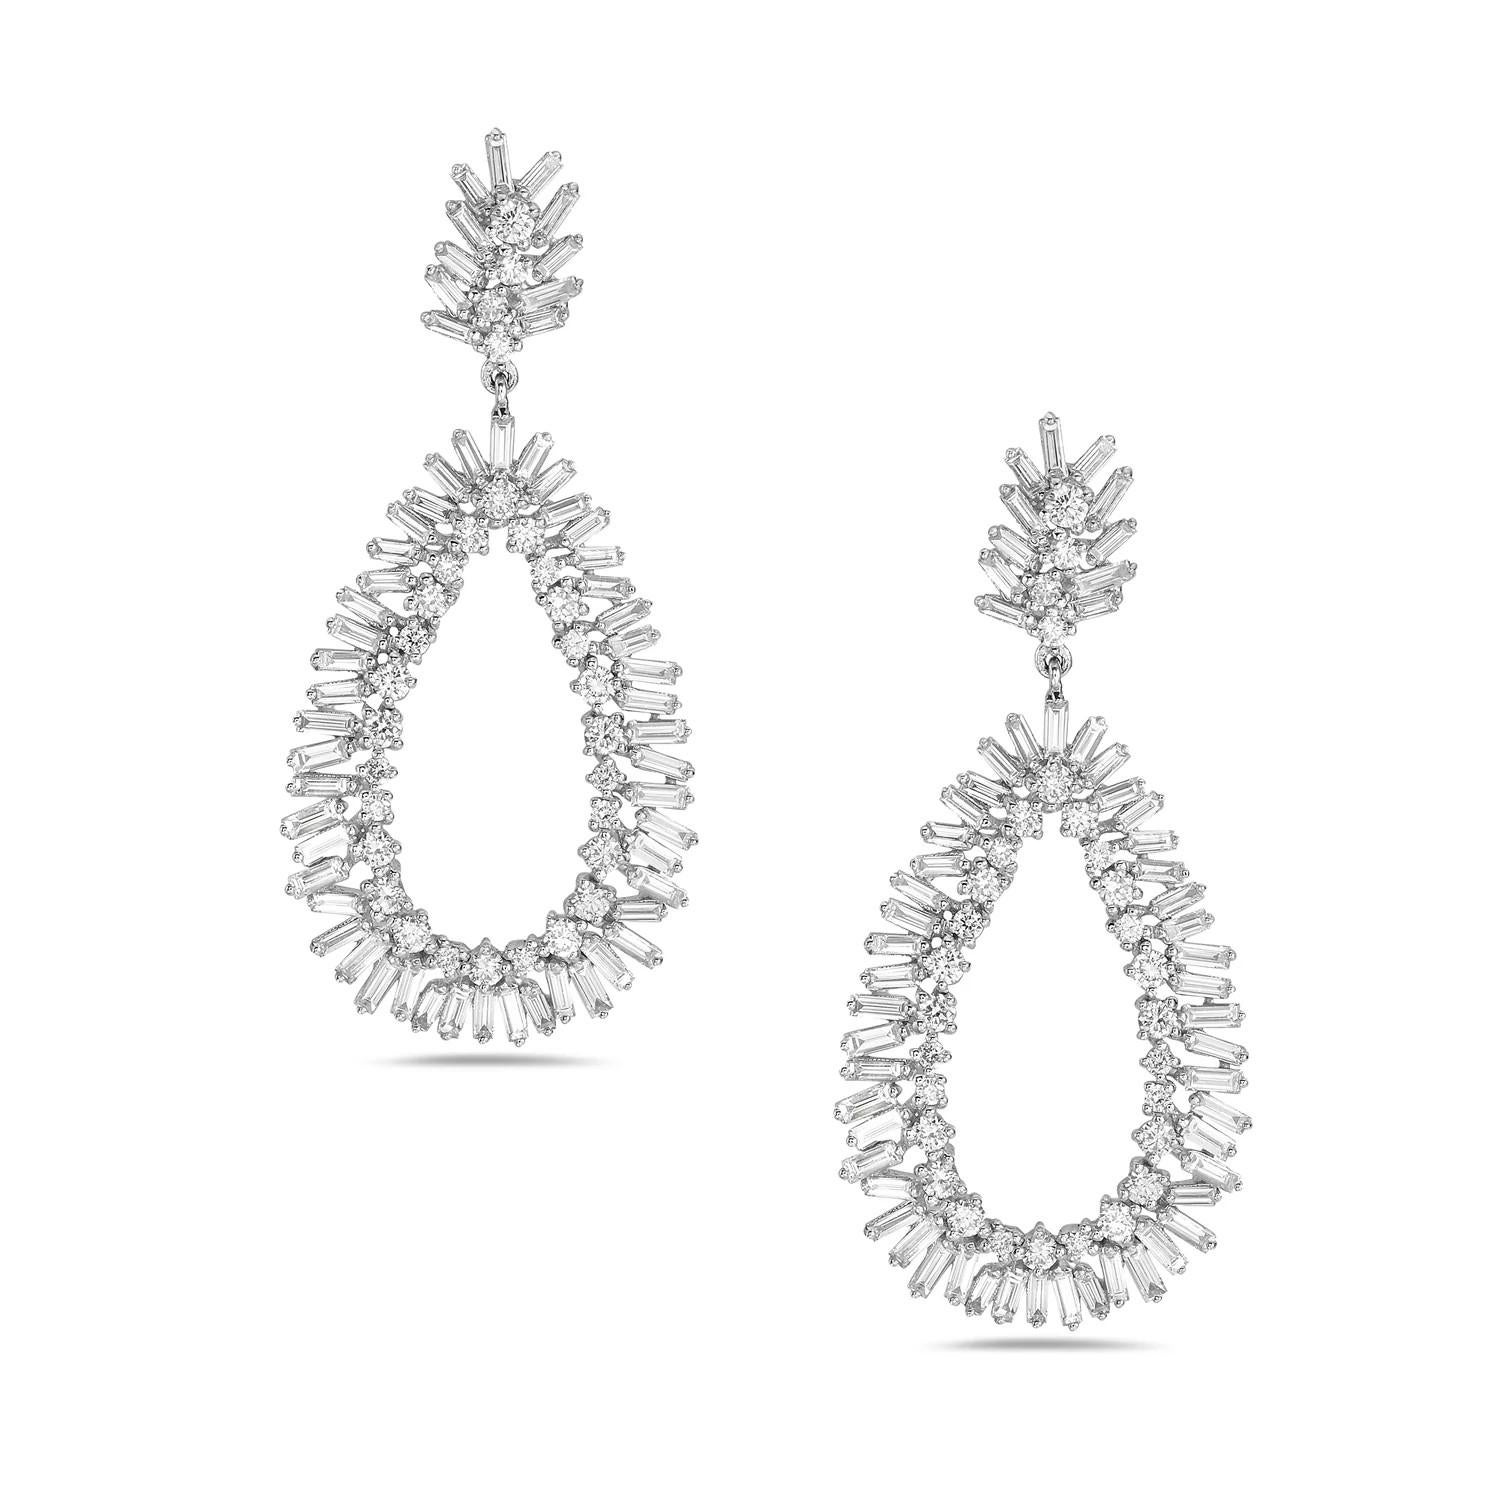 These exquisite earrings are handcrafted in 14-karat white gold and set in 1.96 carats of sparkling diamonds.

FOLLOW MEGHNA JEWELS storefront to view the latest collection & exclusive pieces. Meghna Jewels is proudly rated as a Top Seller on